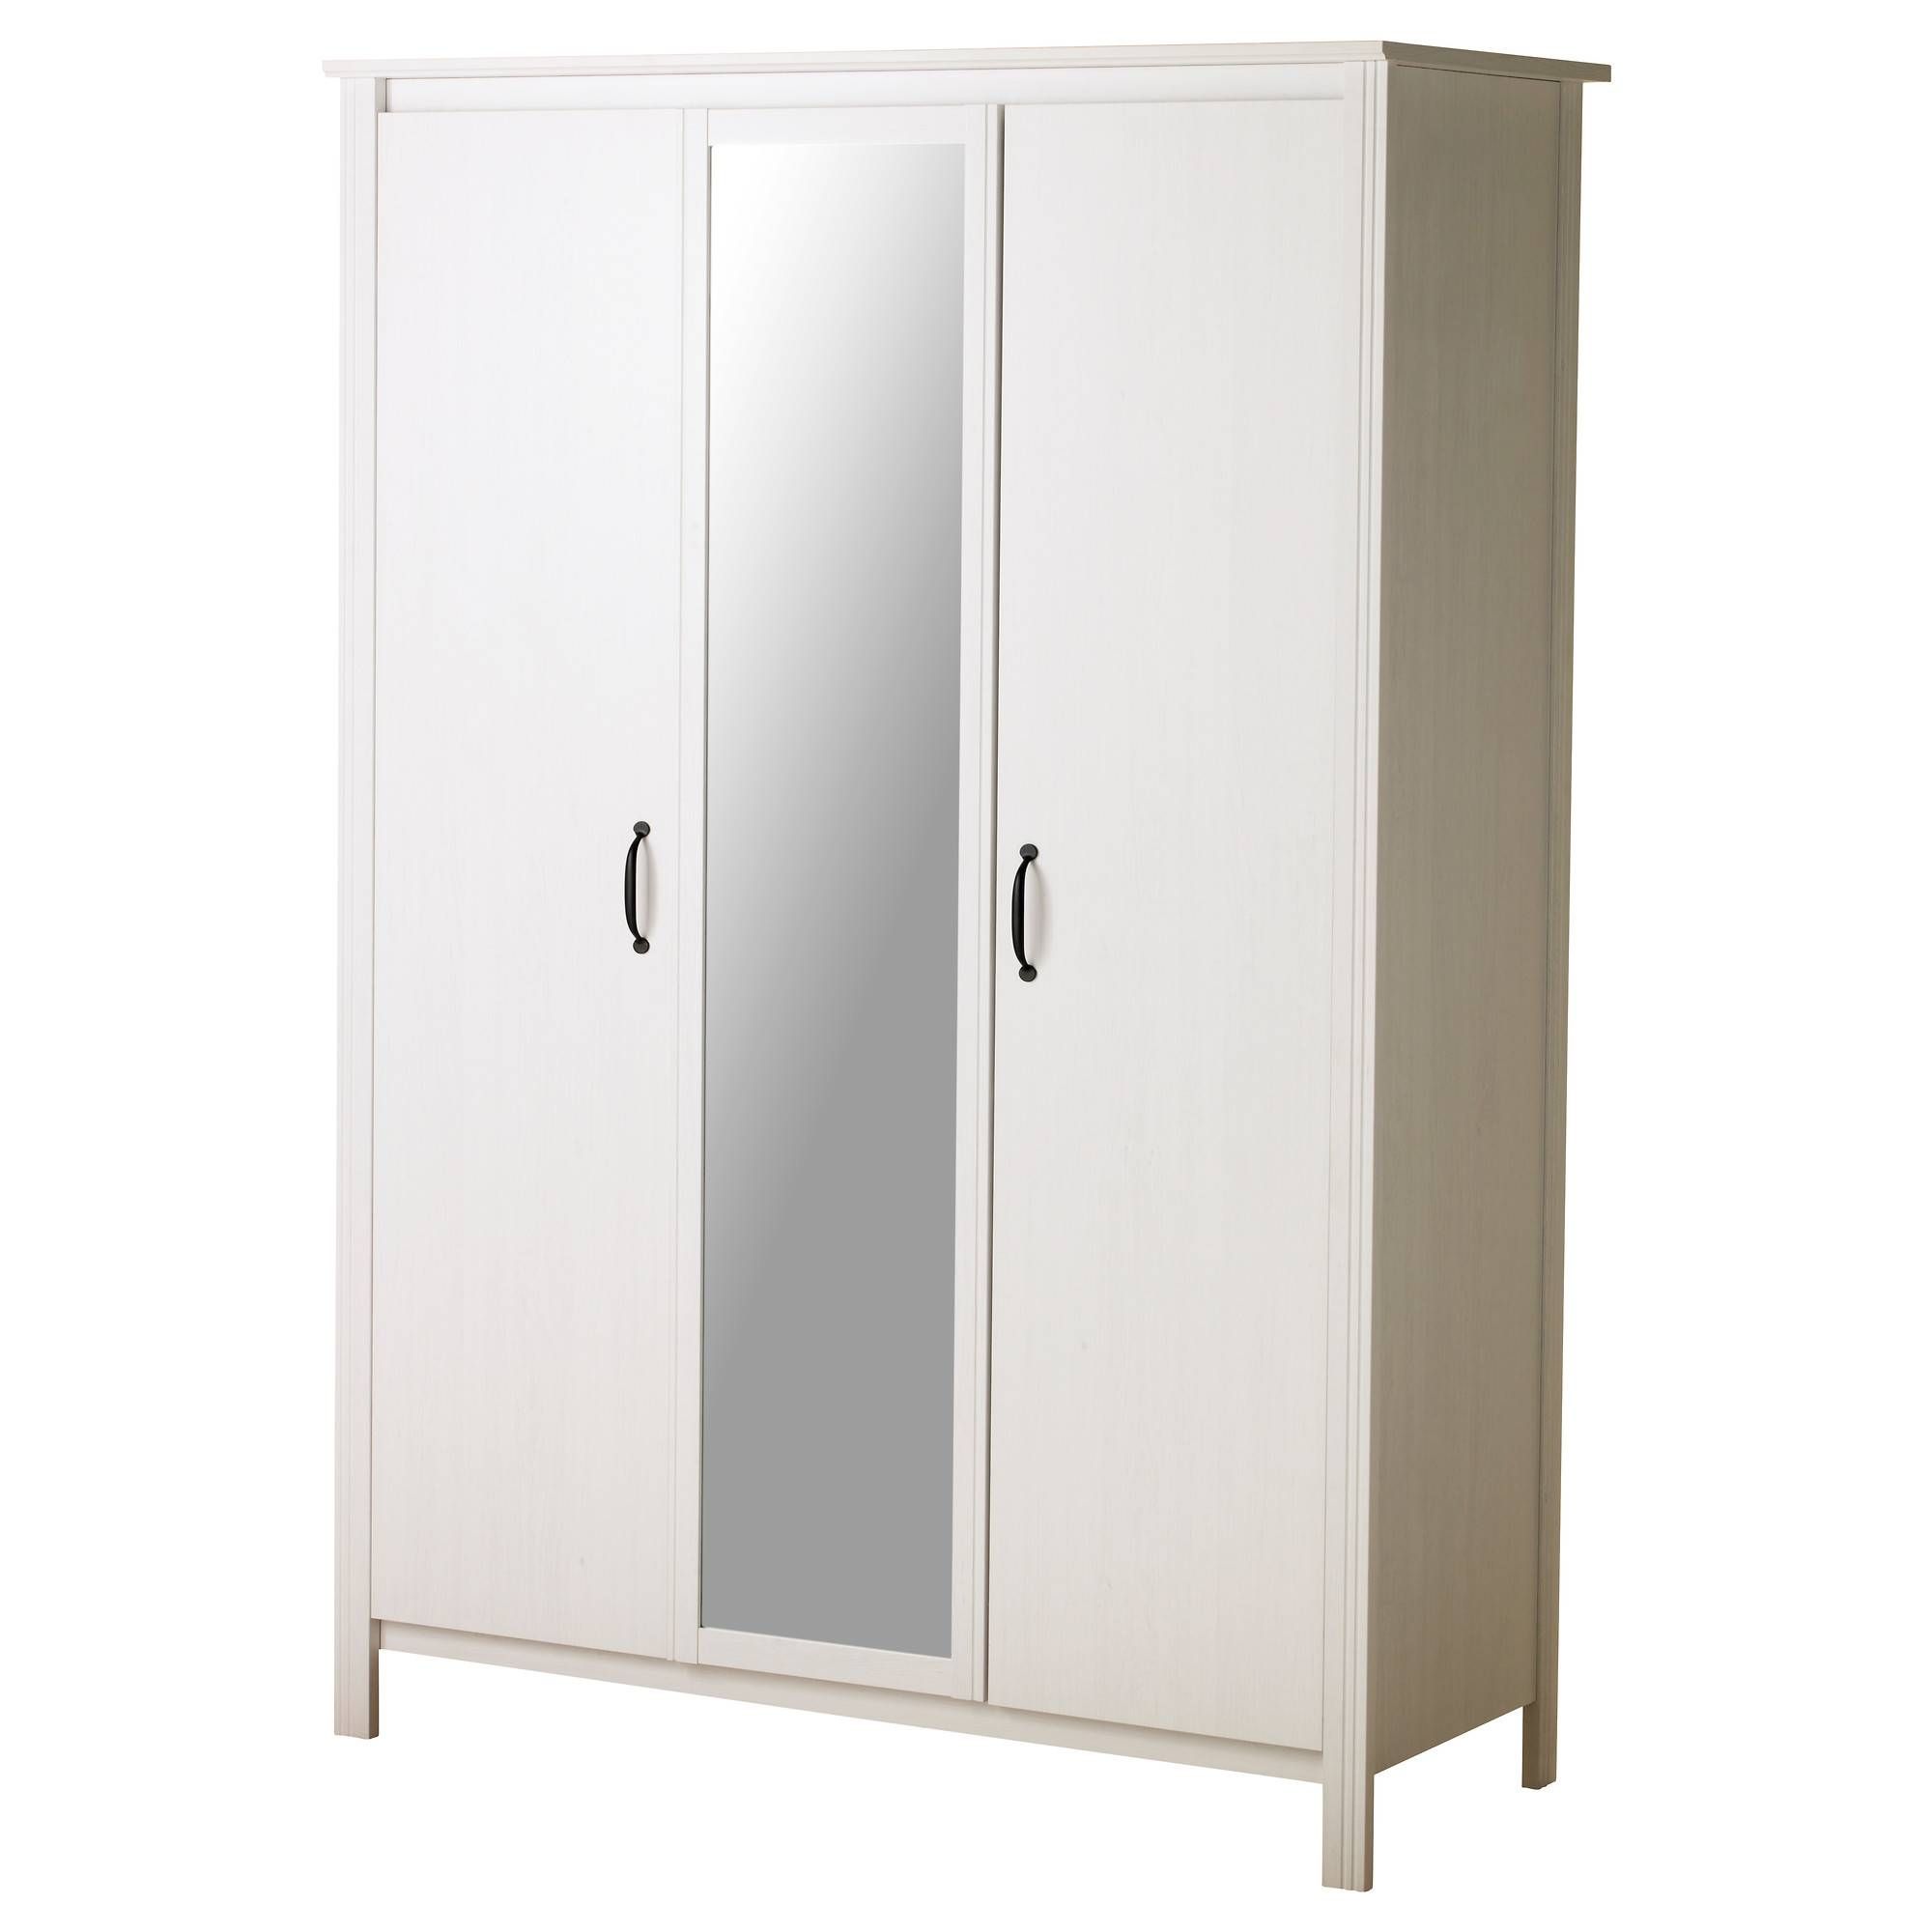 Wardrobes | Ikea Inside Double Rail Wardrobe With Drawers (View 14 of 30)